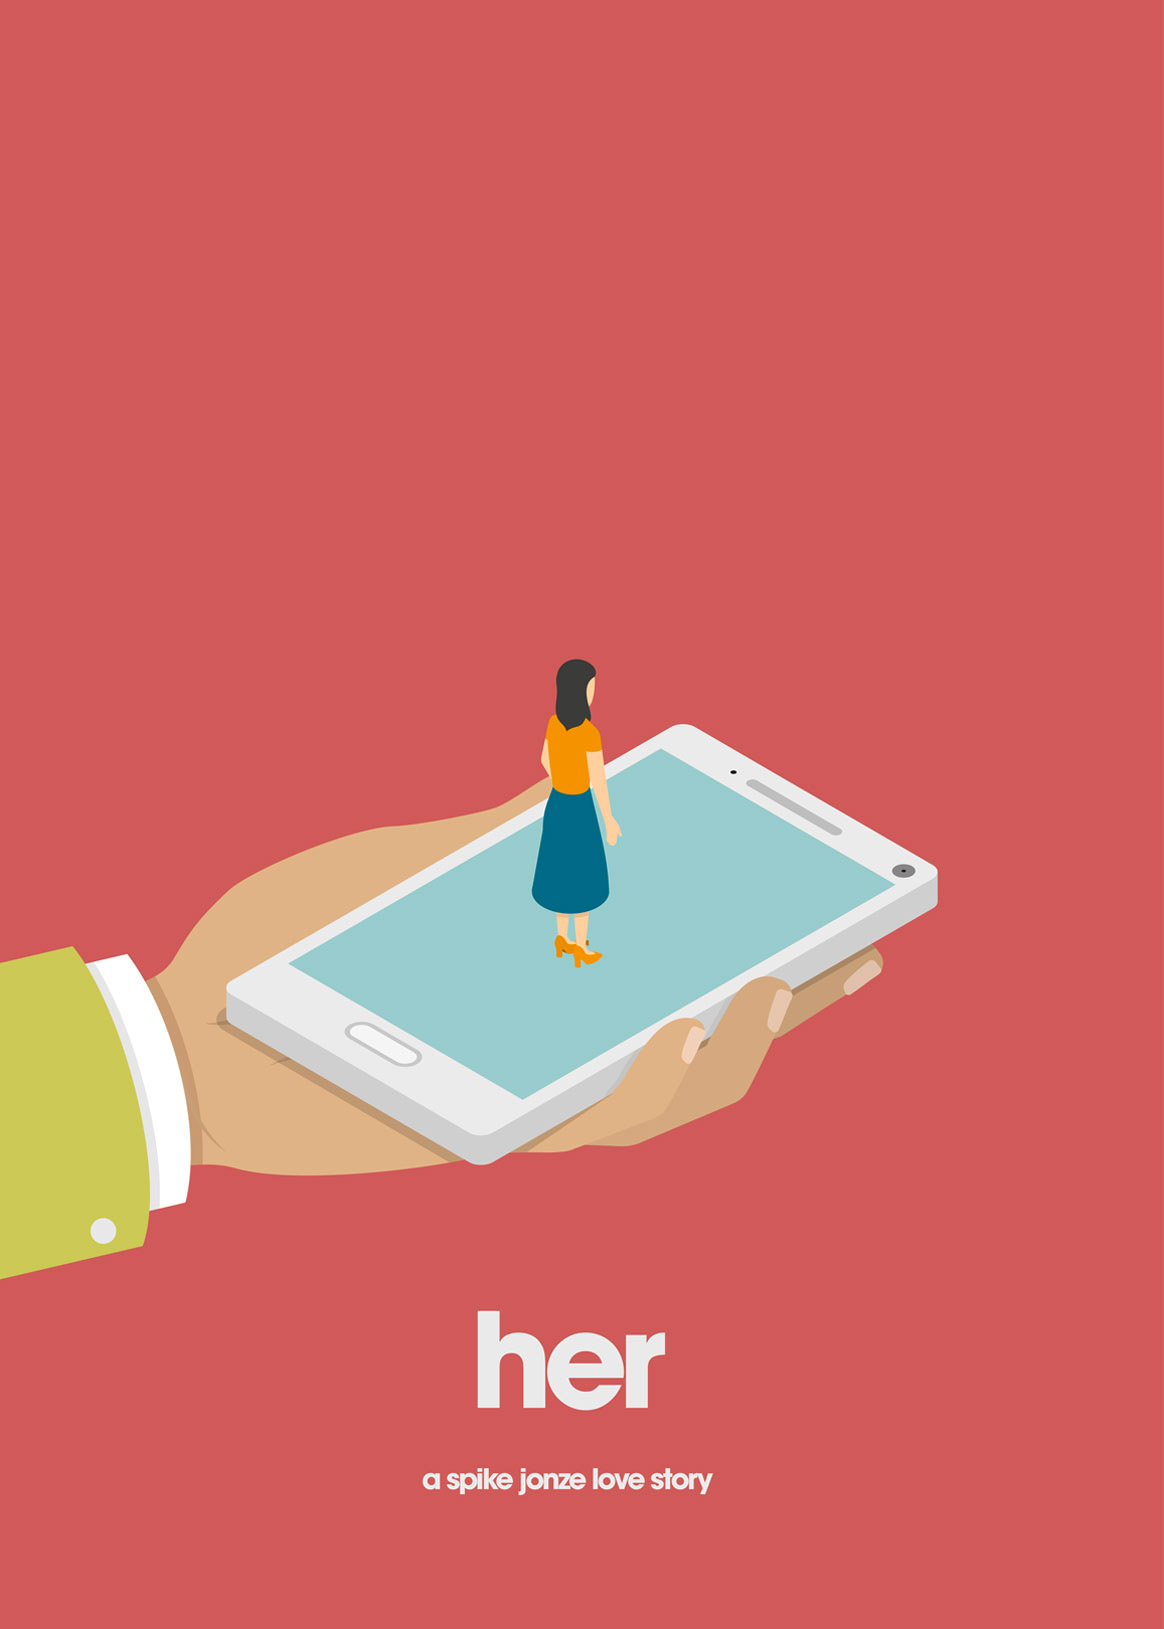 Minimalist Movie Posters by Pete Majarich | Daily design ...